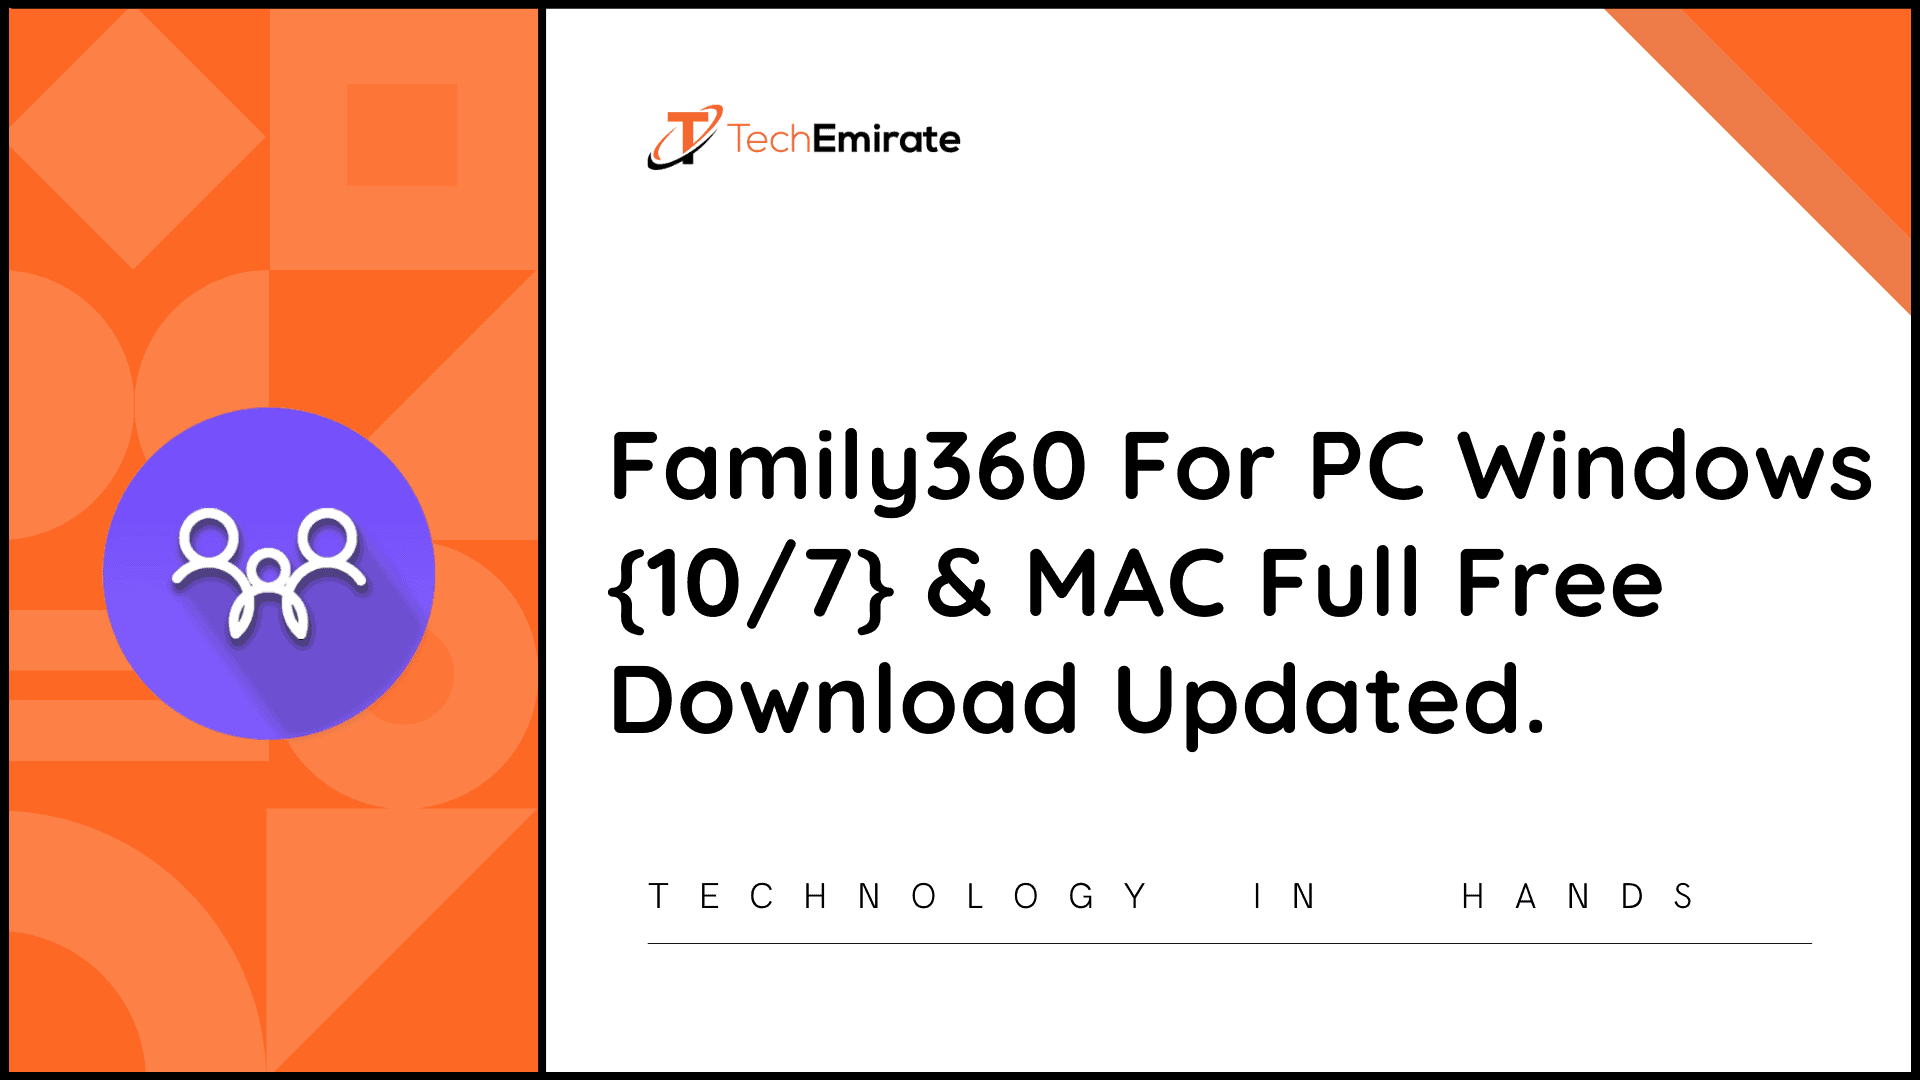 techemirate.com - Family360 For PC